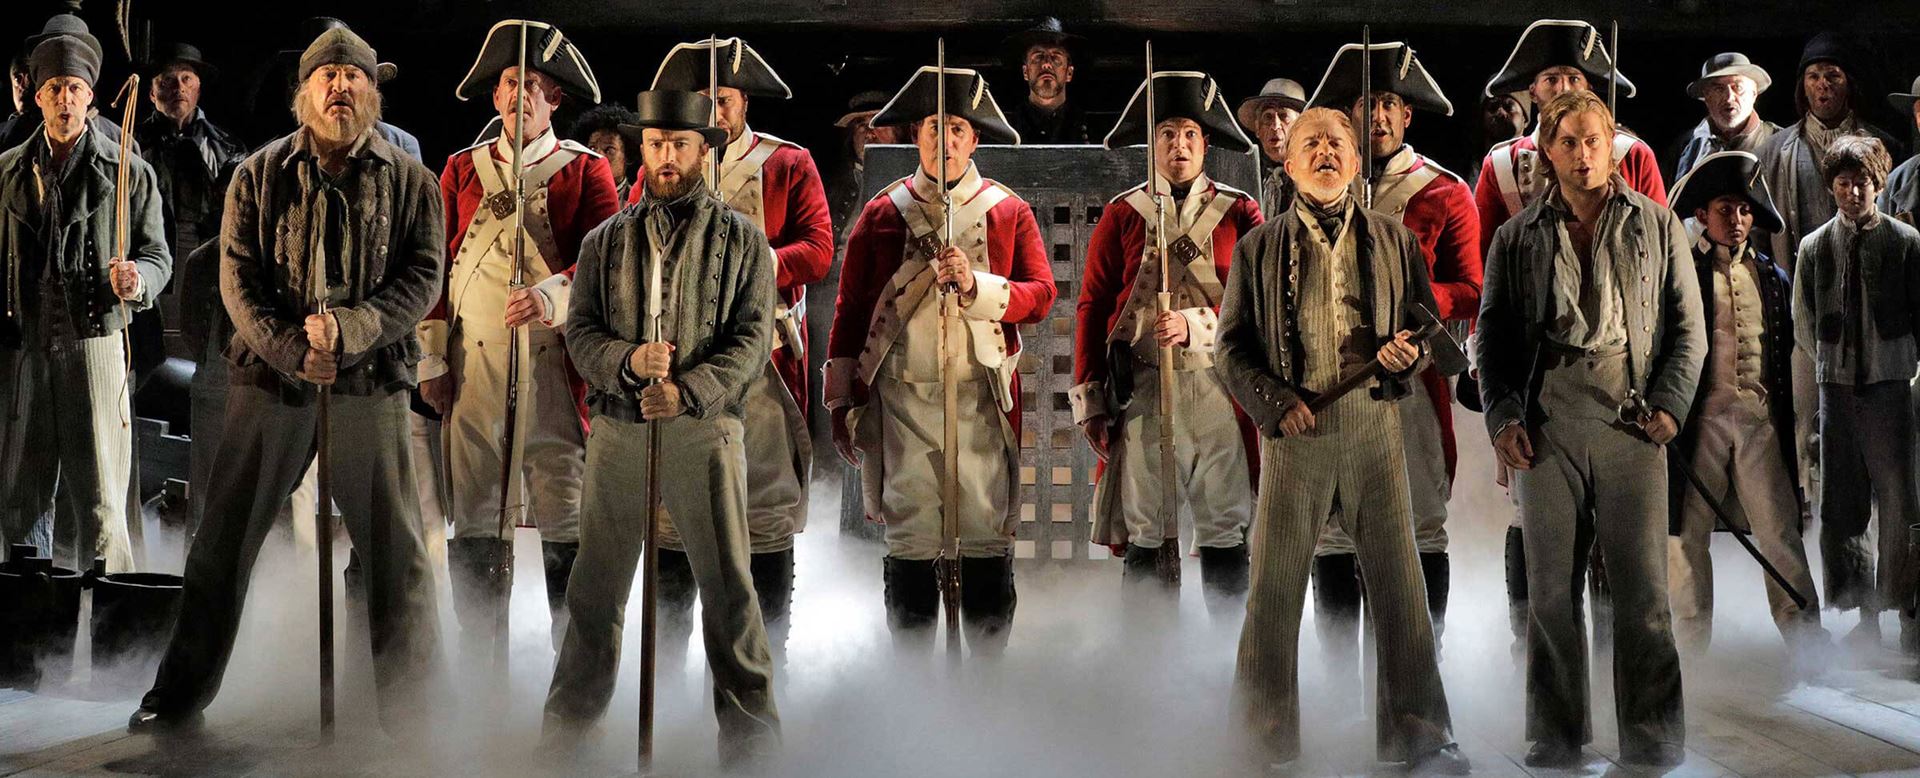 Billy Budd Opera cast in military uniforms standing at attention as header image for operas meaning.